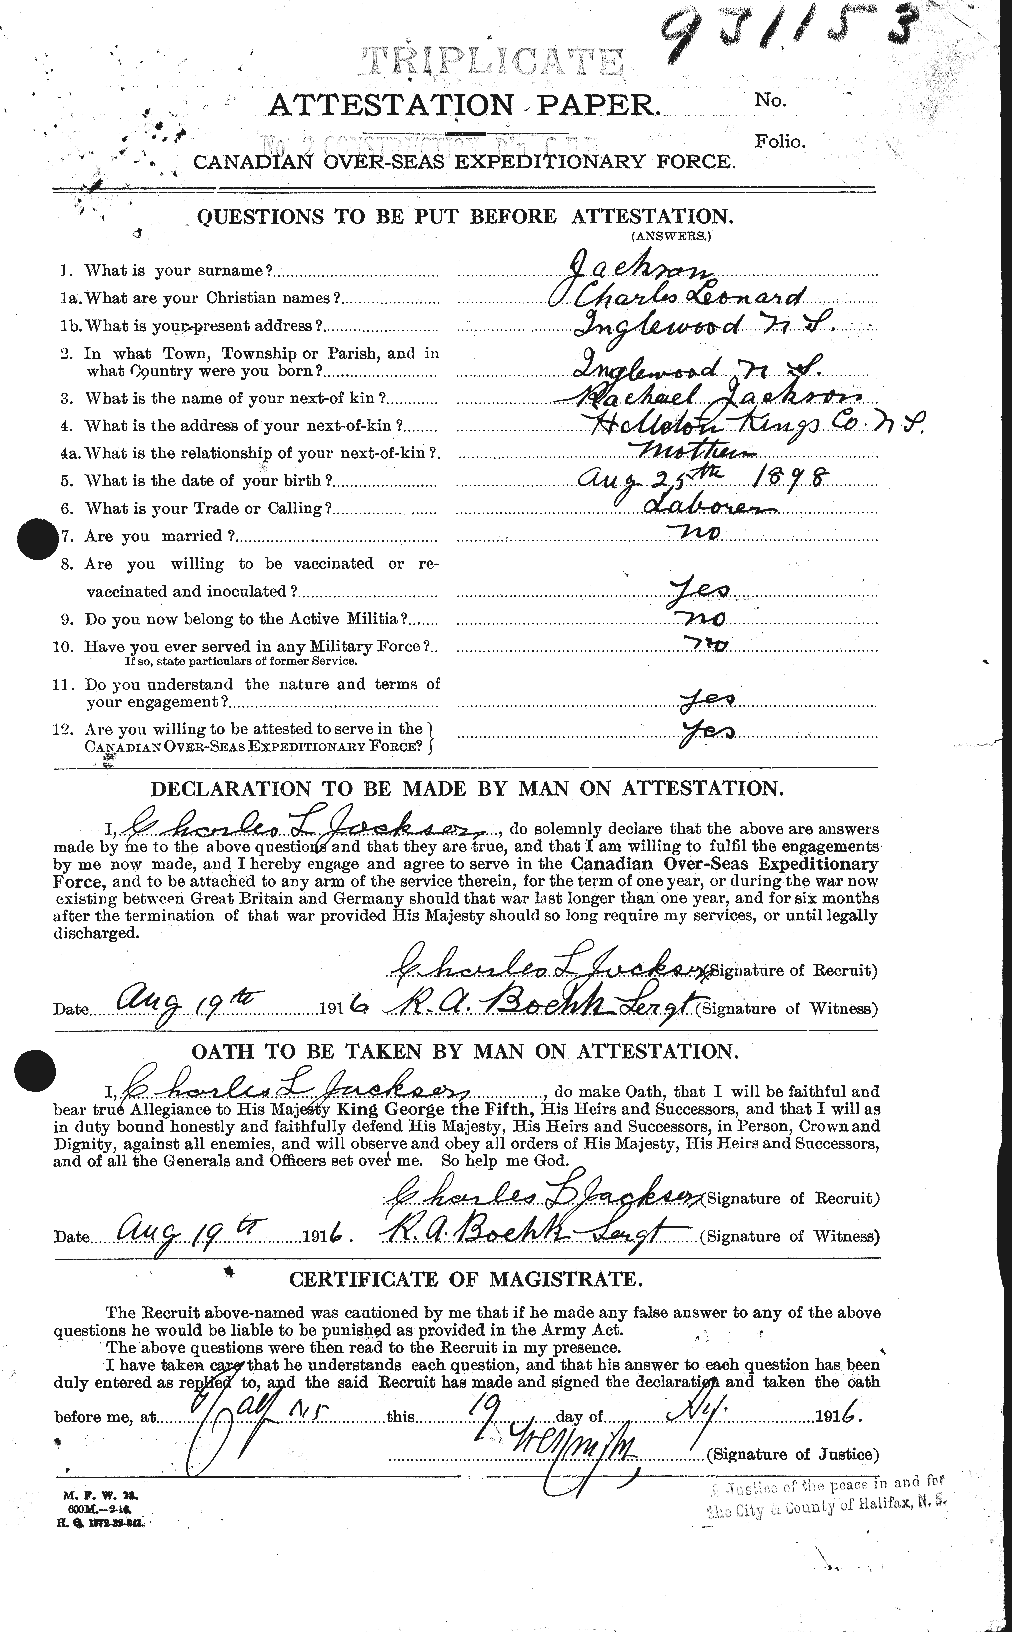 Personnel Records of the First World War - CEF 411827a